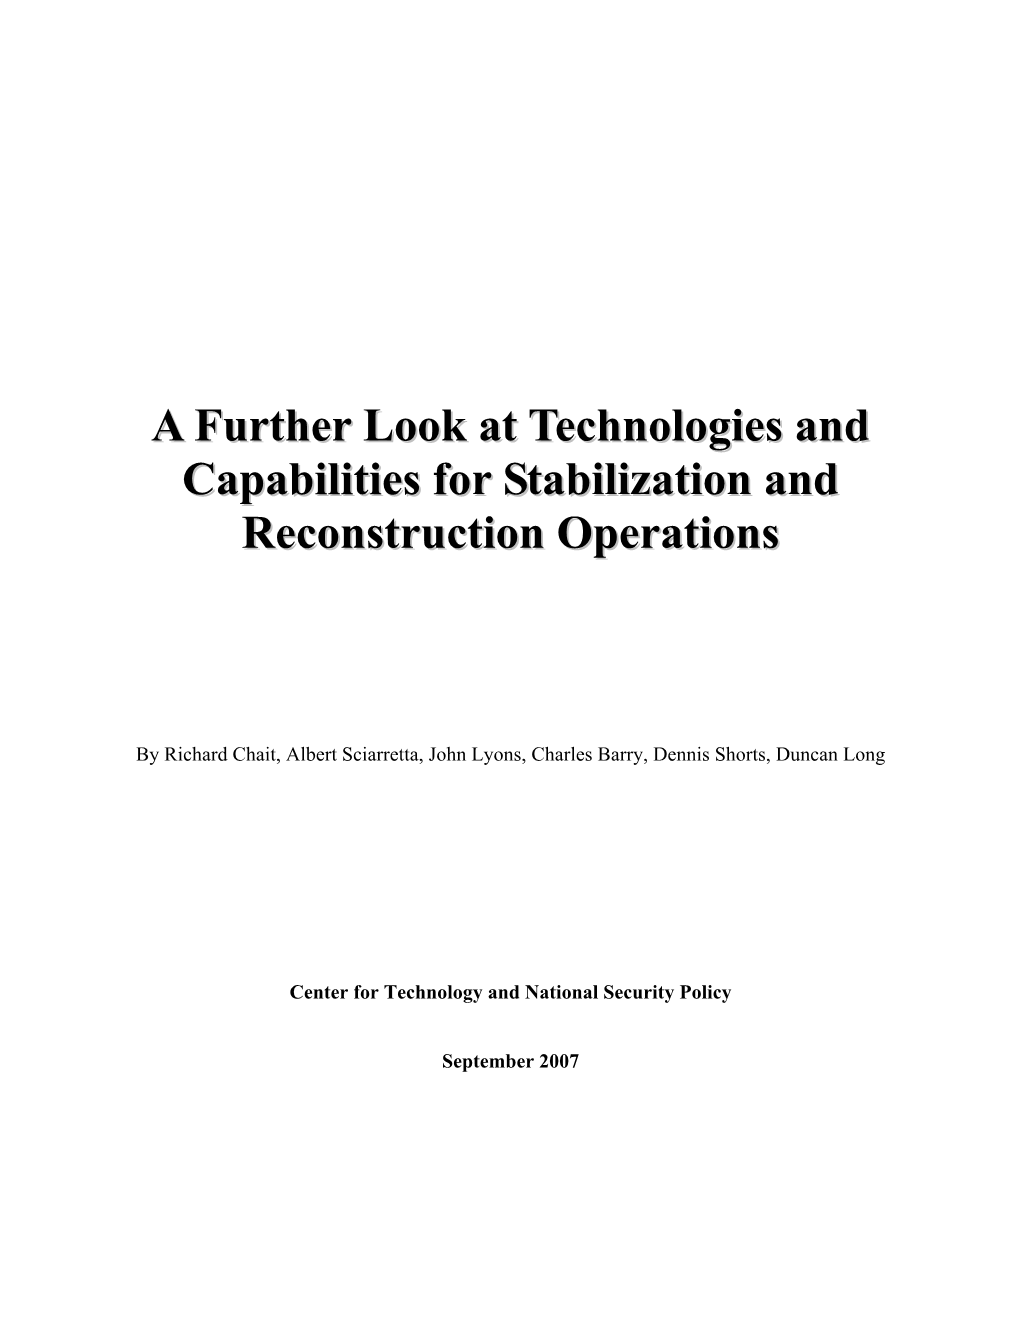 A Further Look at Technologies and Capabilities for Stabilization And